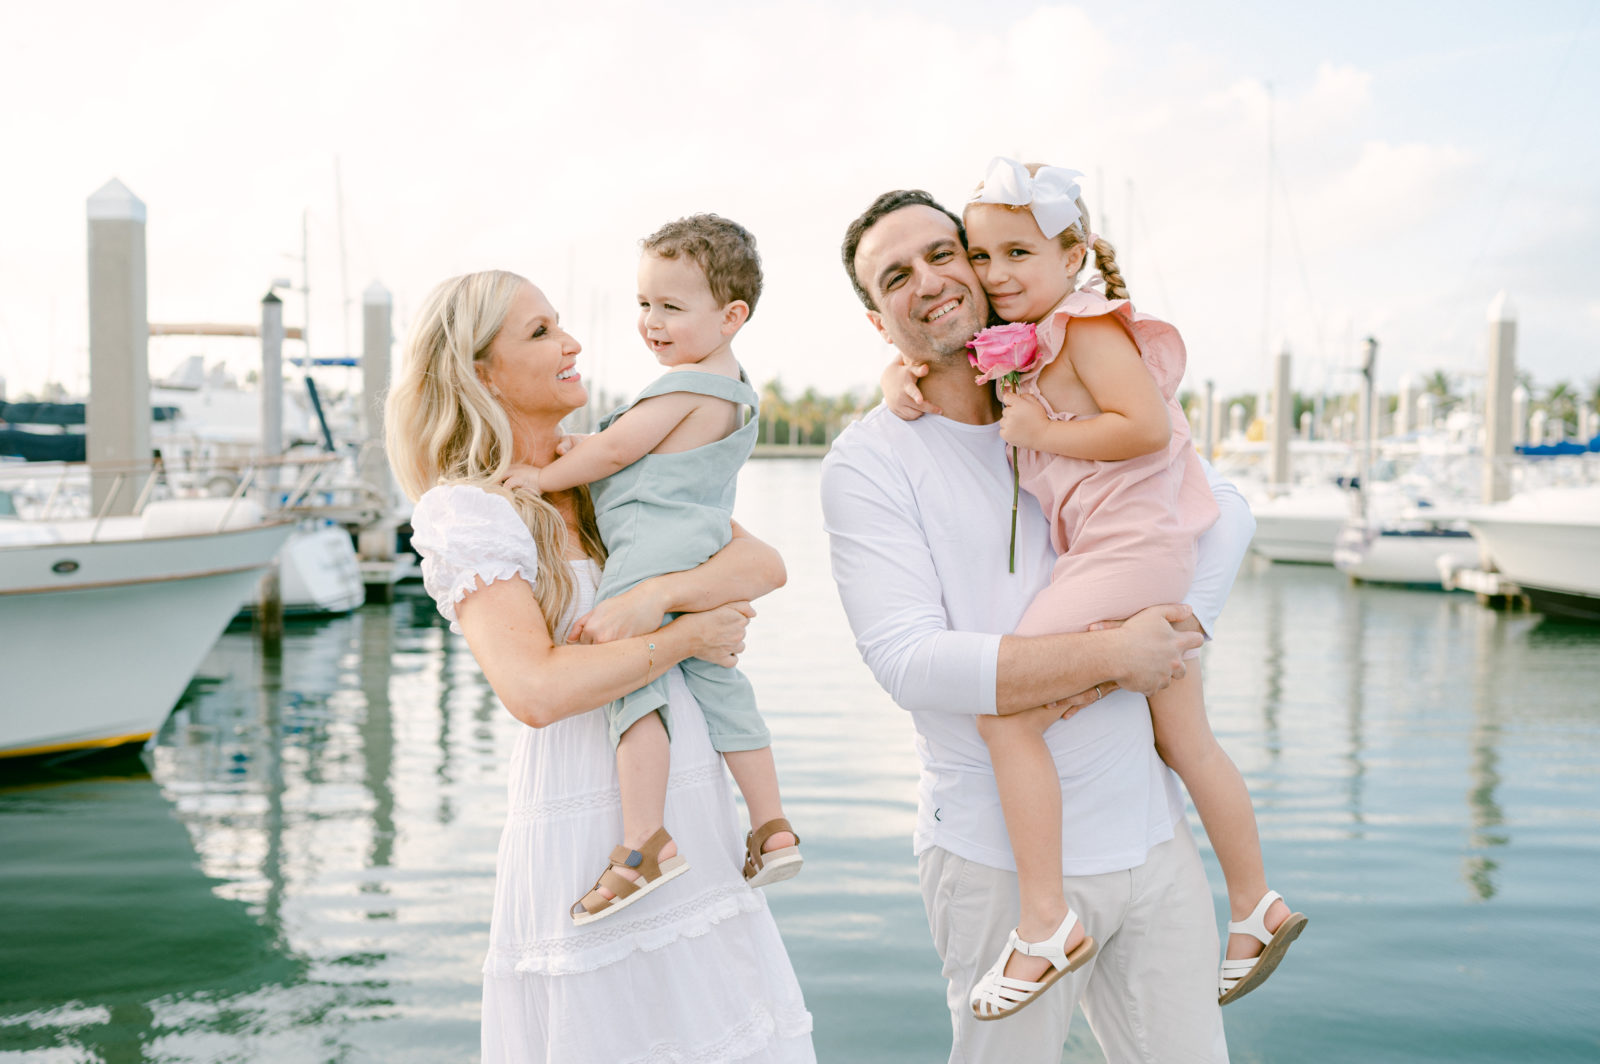 Family photos at the Marina with boats in Key Biscayne